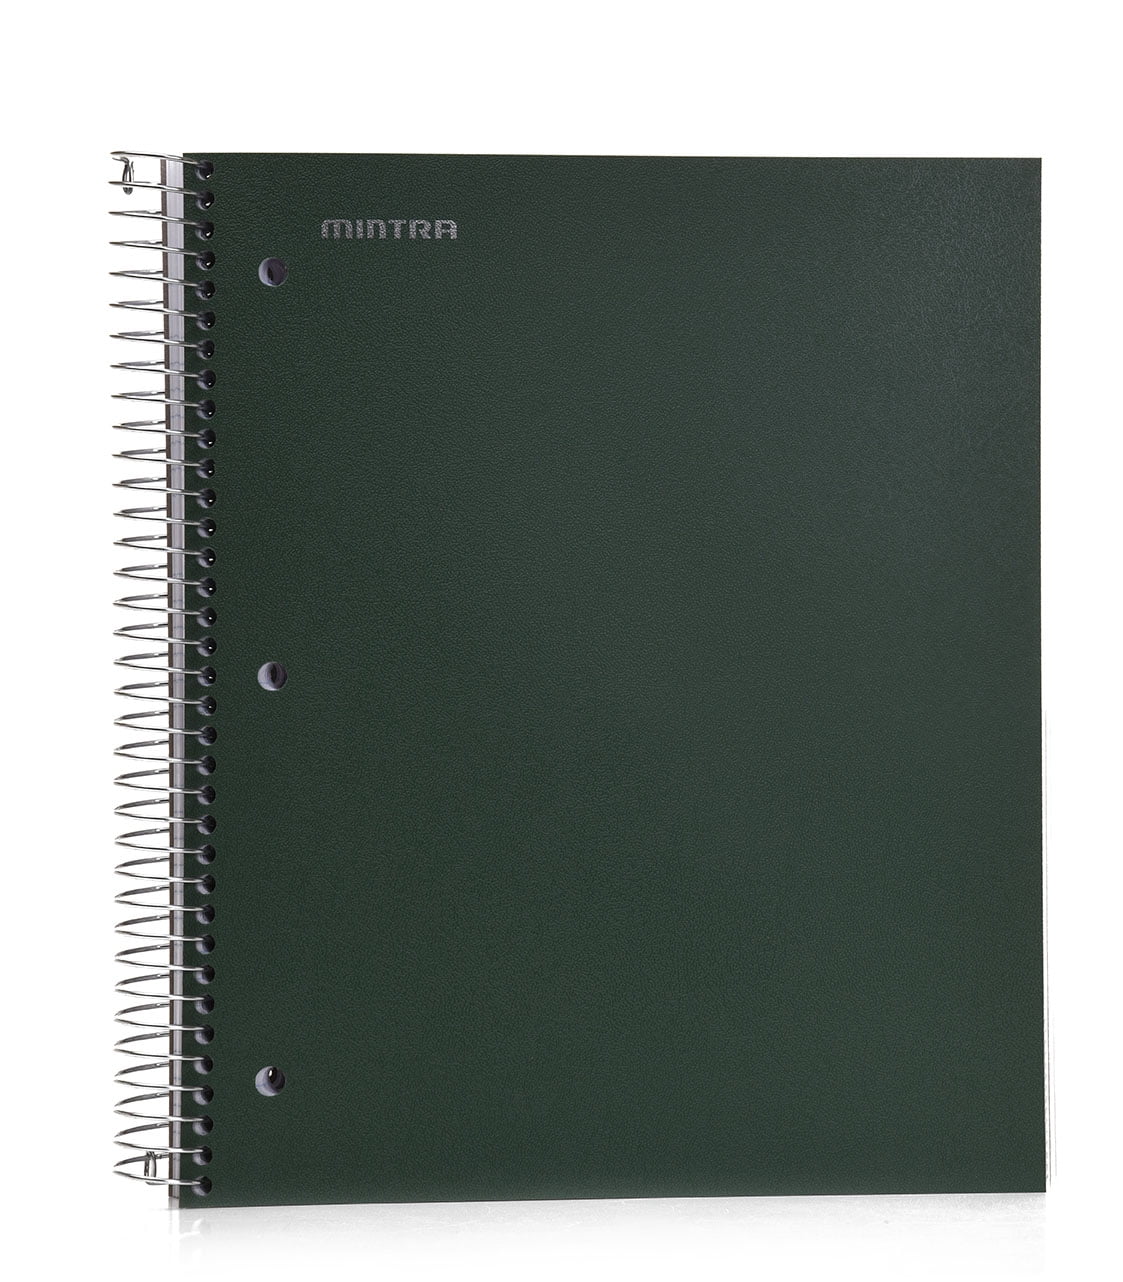 A4 A5 Wiro Notebook Ruled 100 pages Punched Holes Writing Notes School Books 